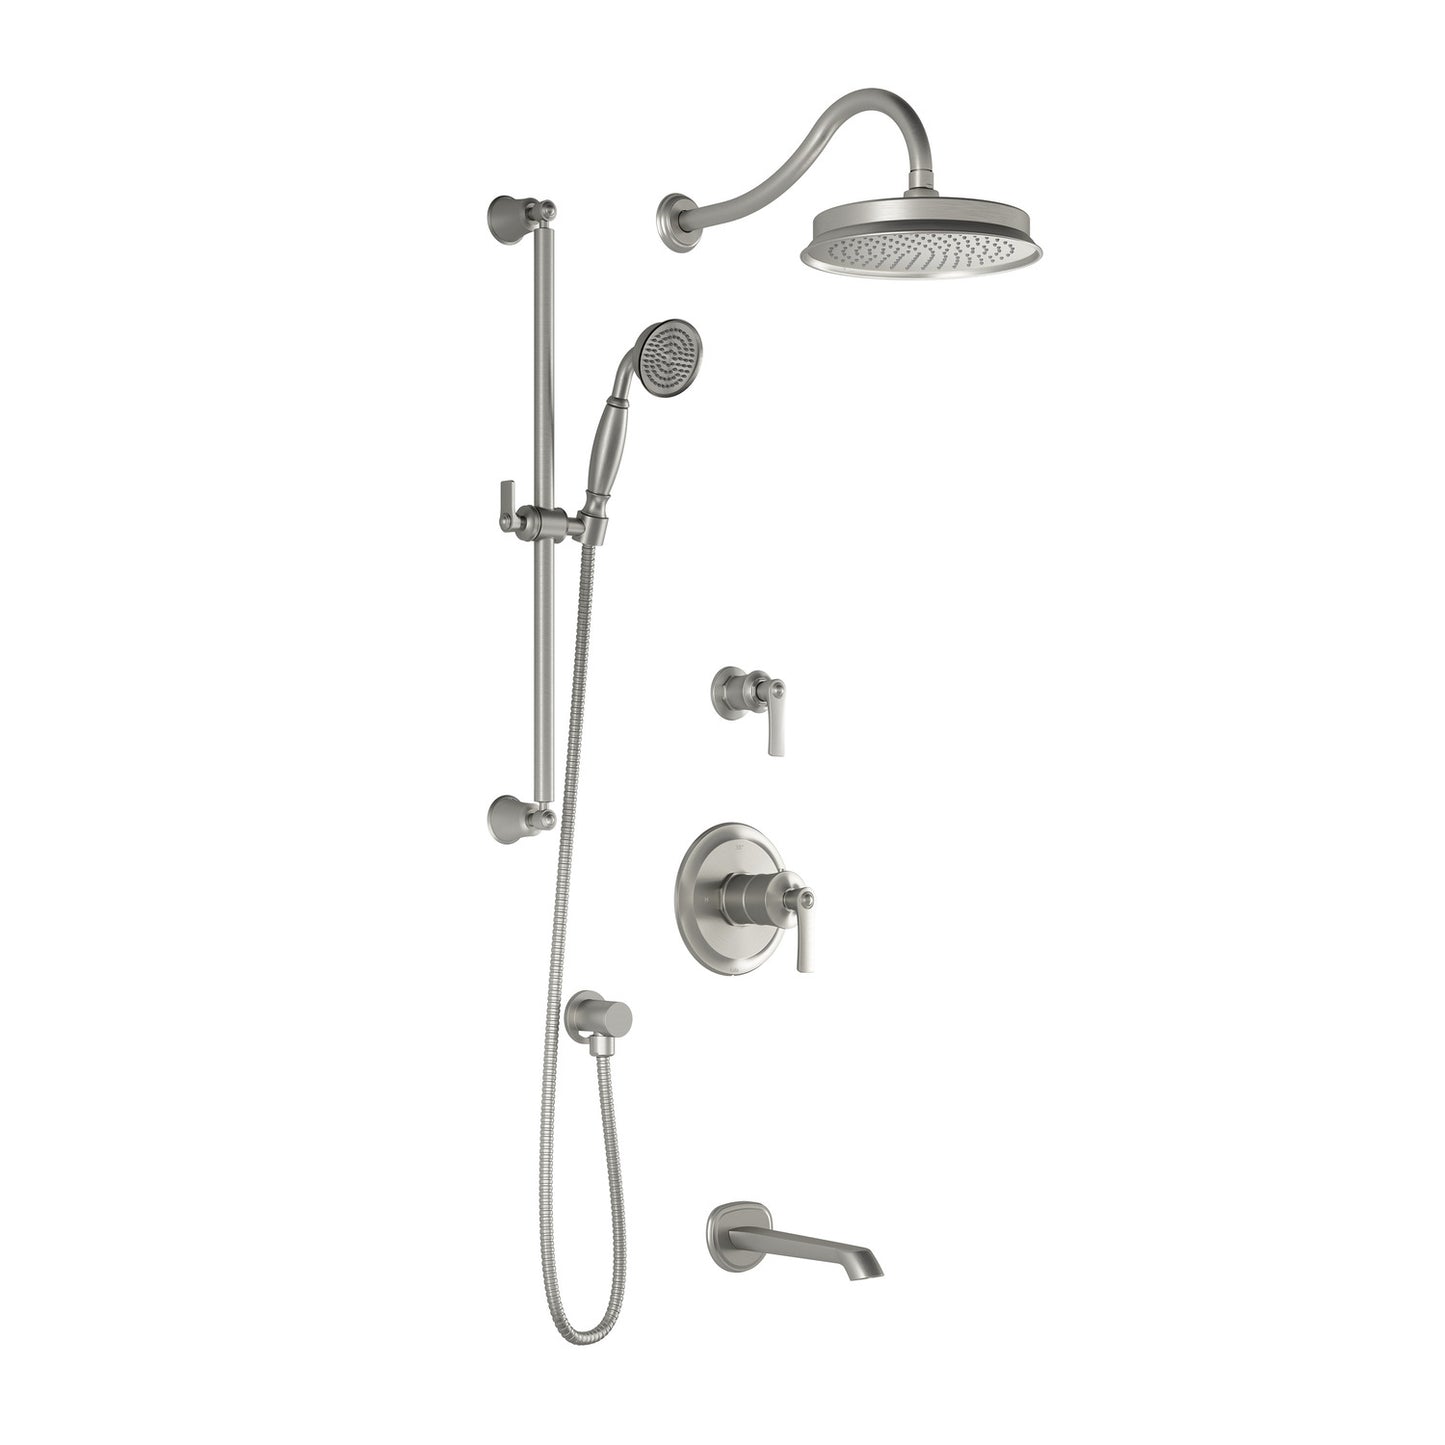 Kalia Rustik TD3 : Aquatonik T/P Shower System With 9" Shower Head, Hand Shower Tub Filler and Wall Arm (BF1617)